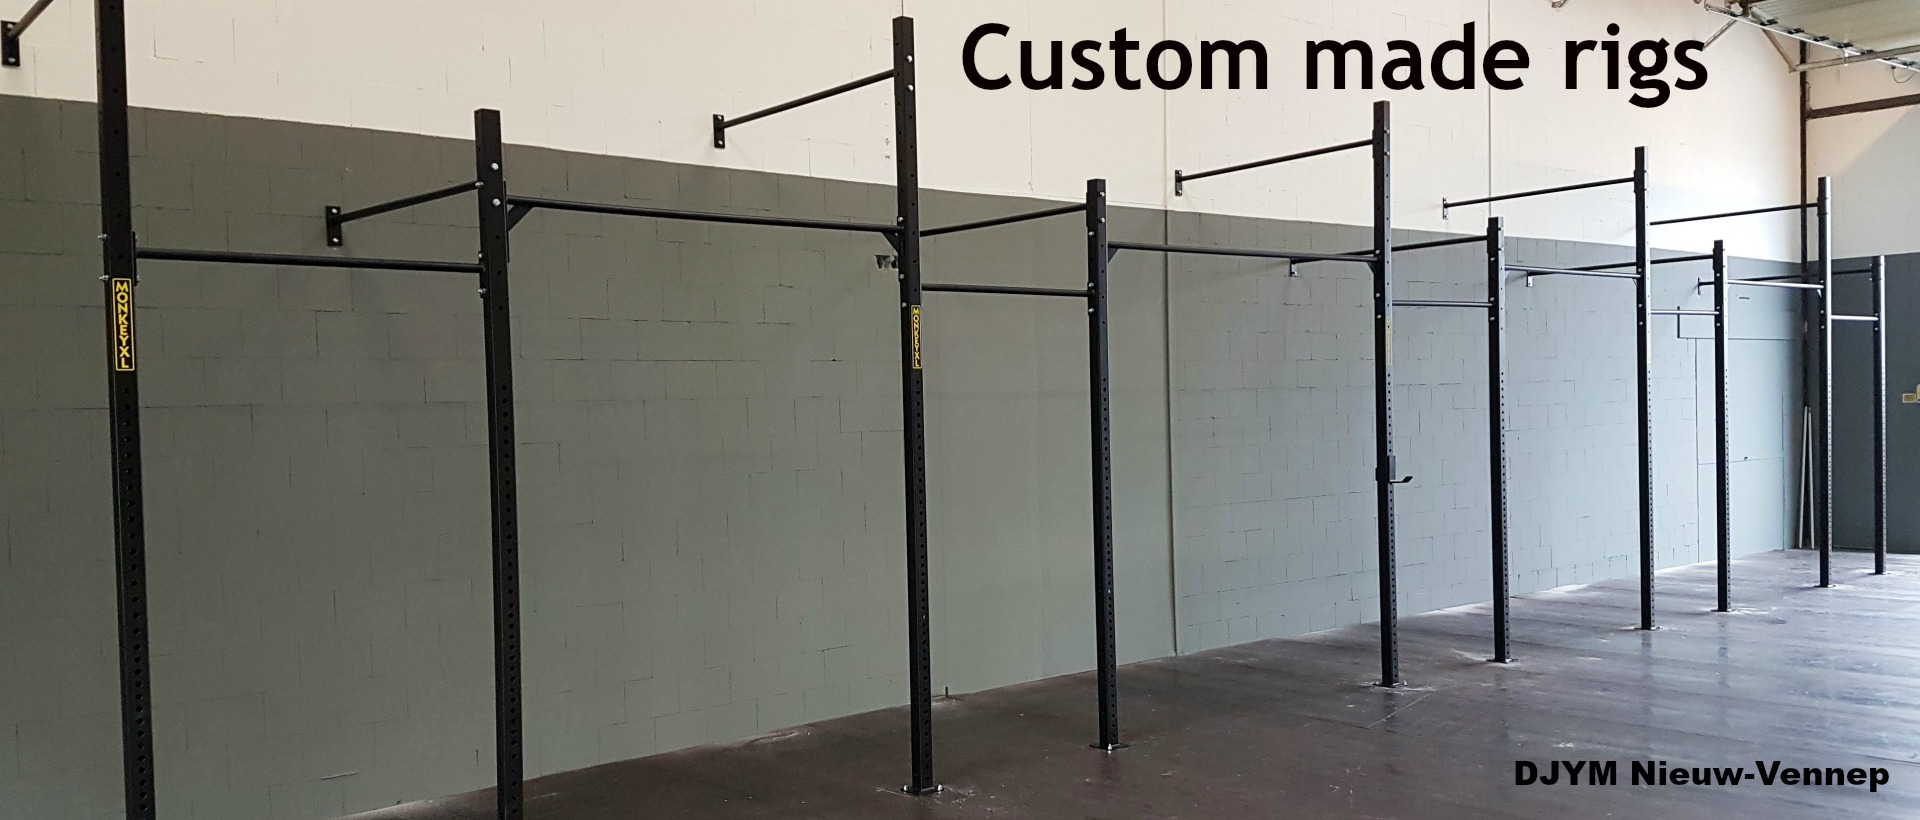 wallmount rigs free standing